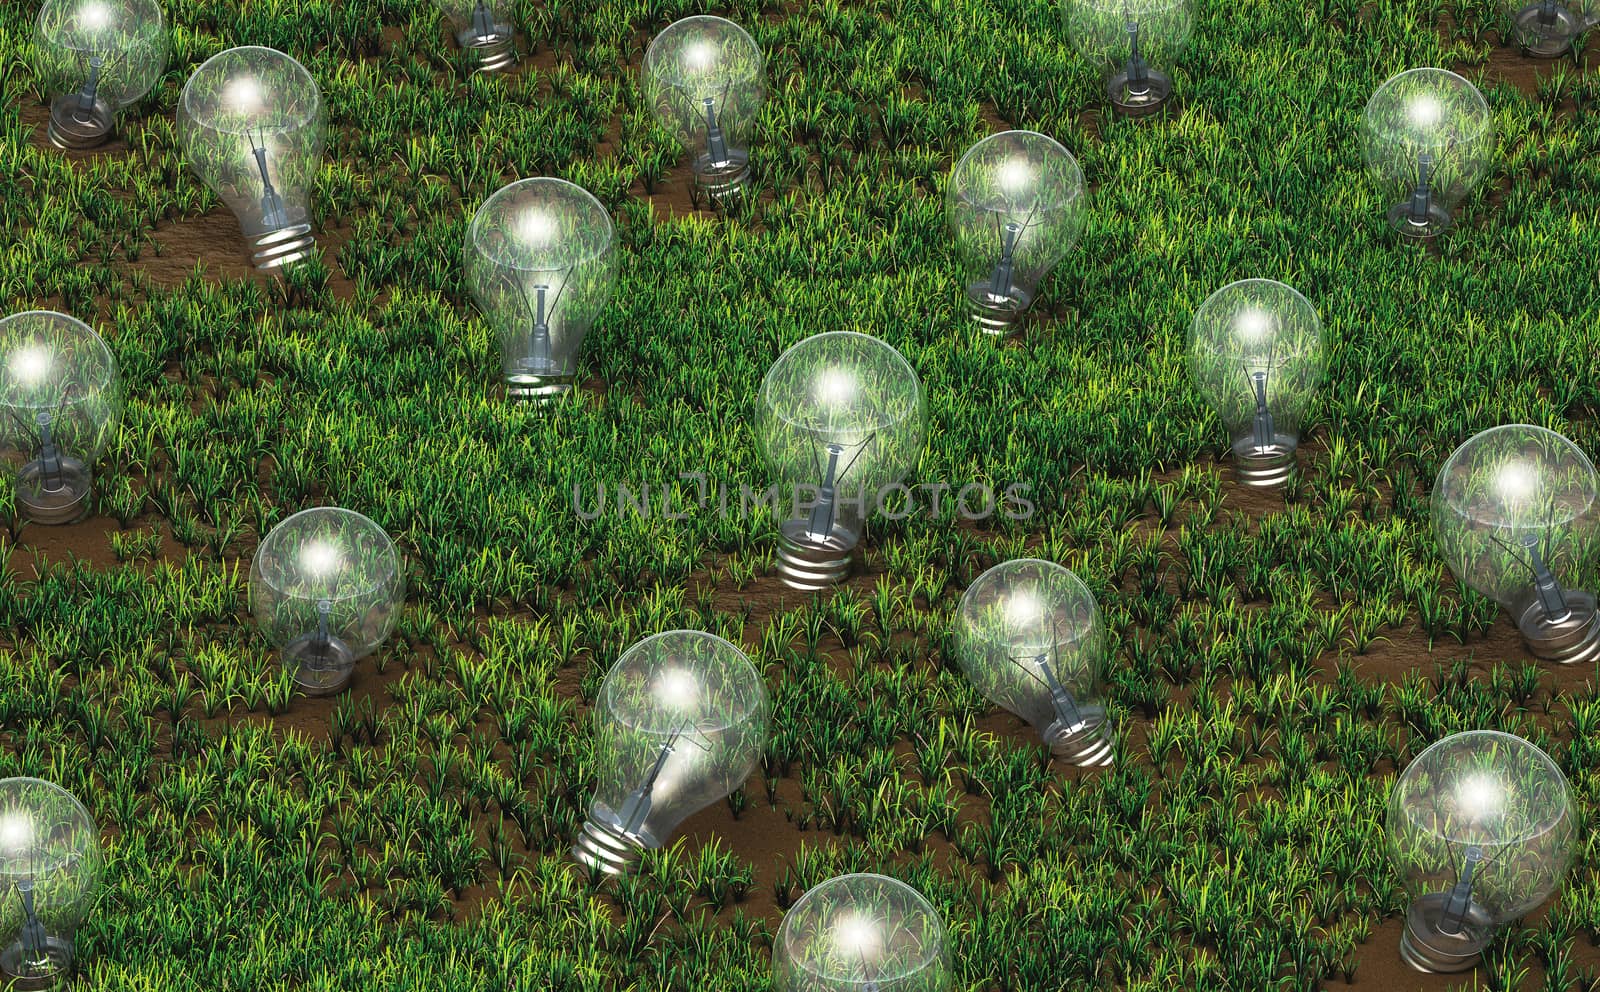 Cultivation of unlit light bulbs by TaiChesco